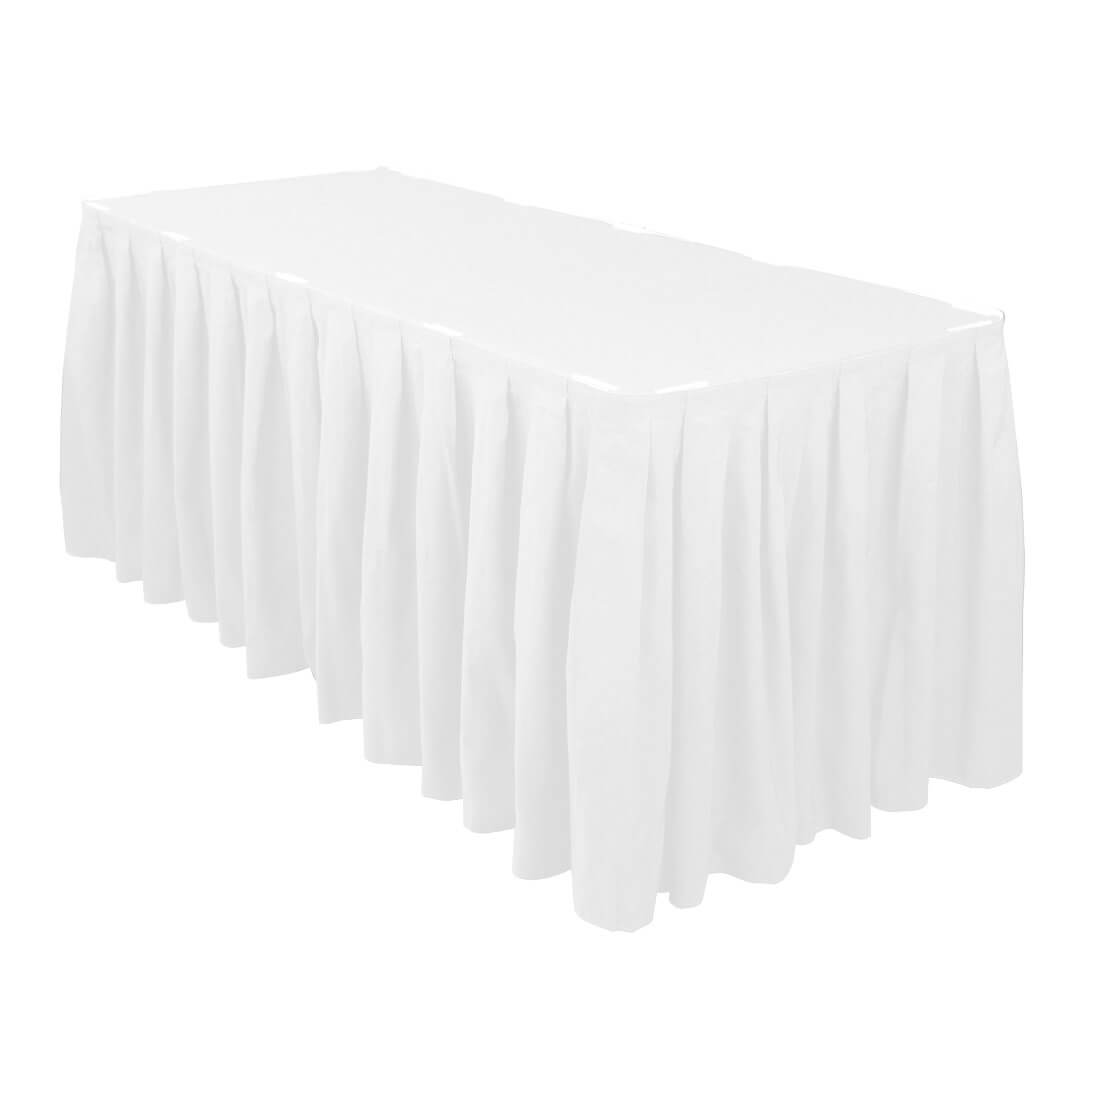 Chicago Banquet Table Skirt